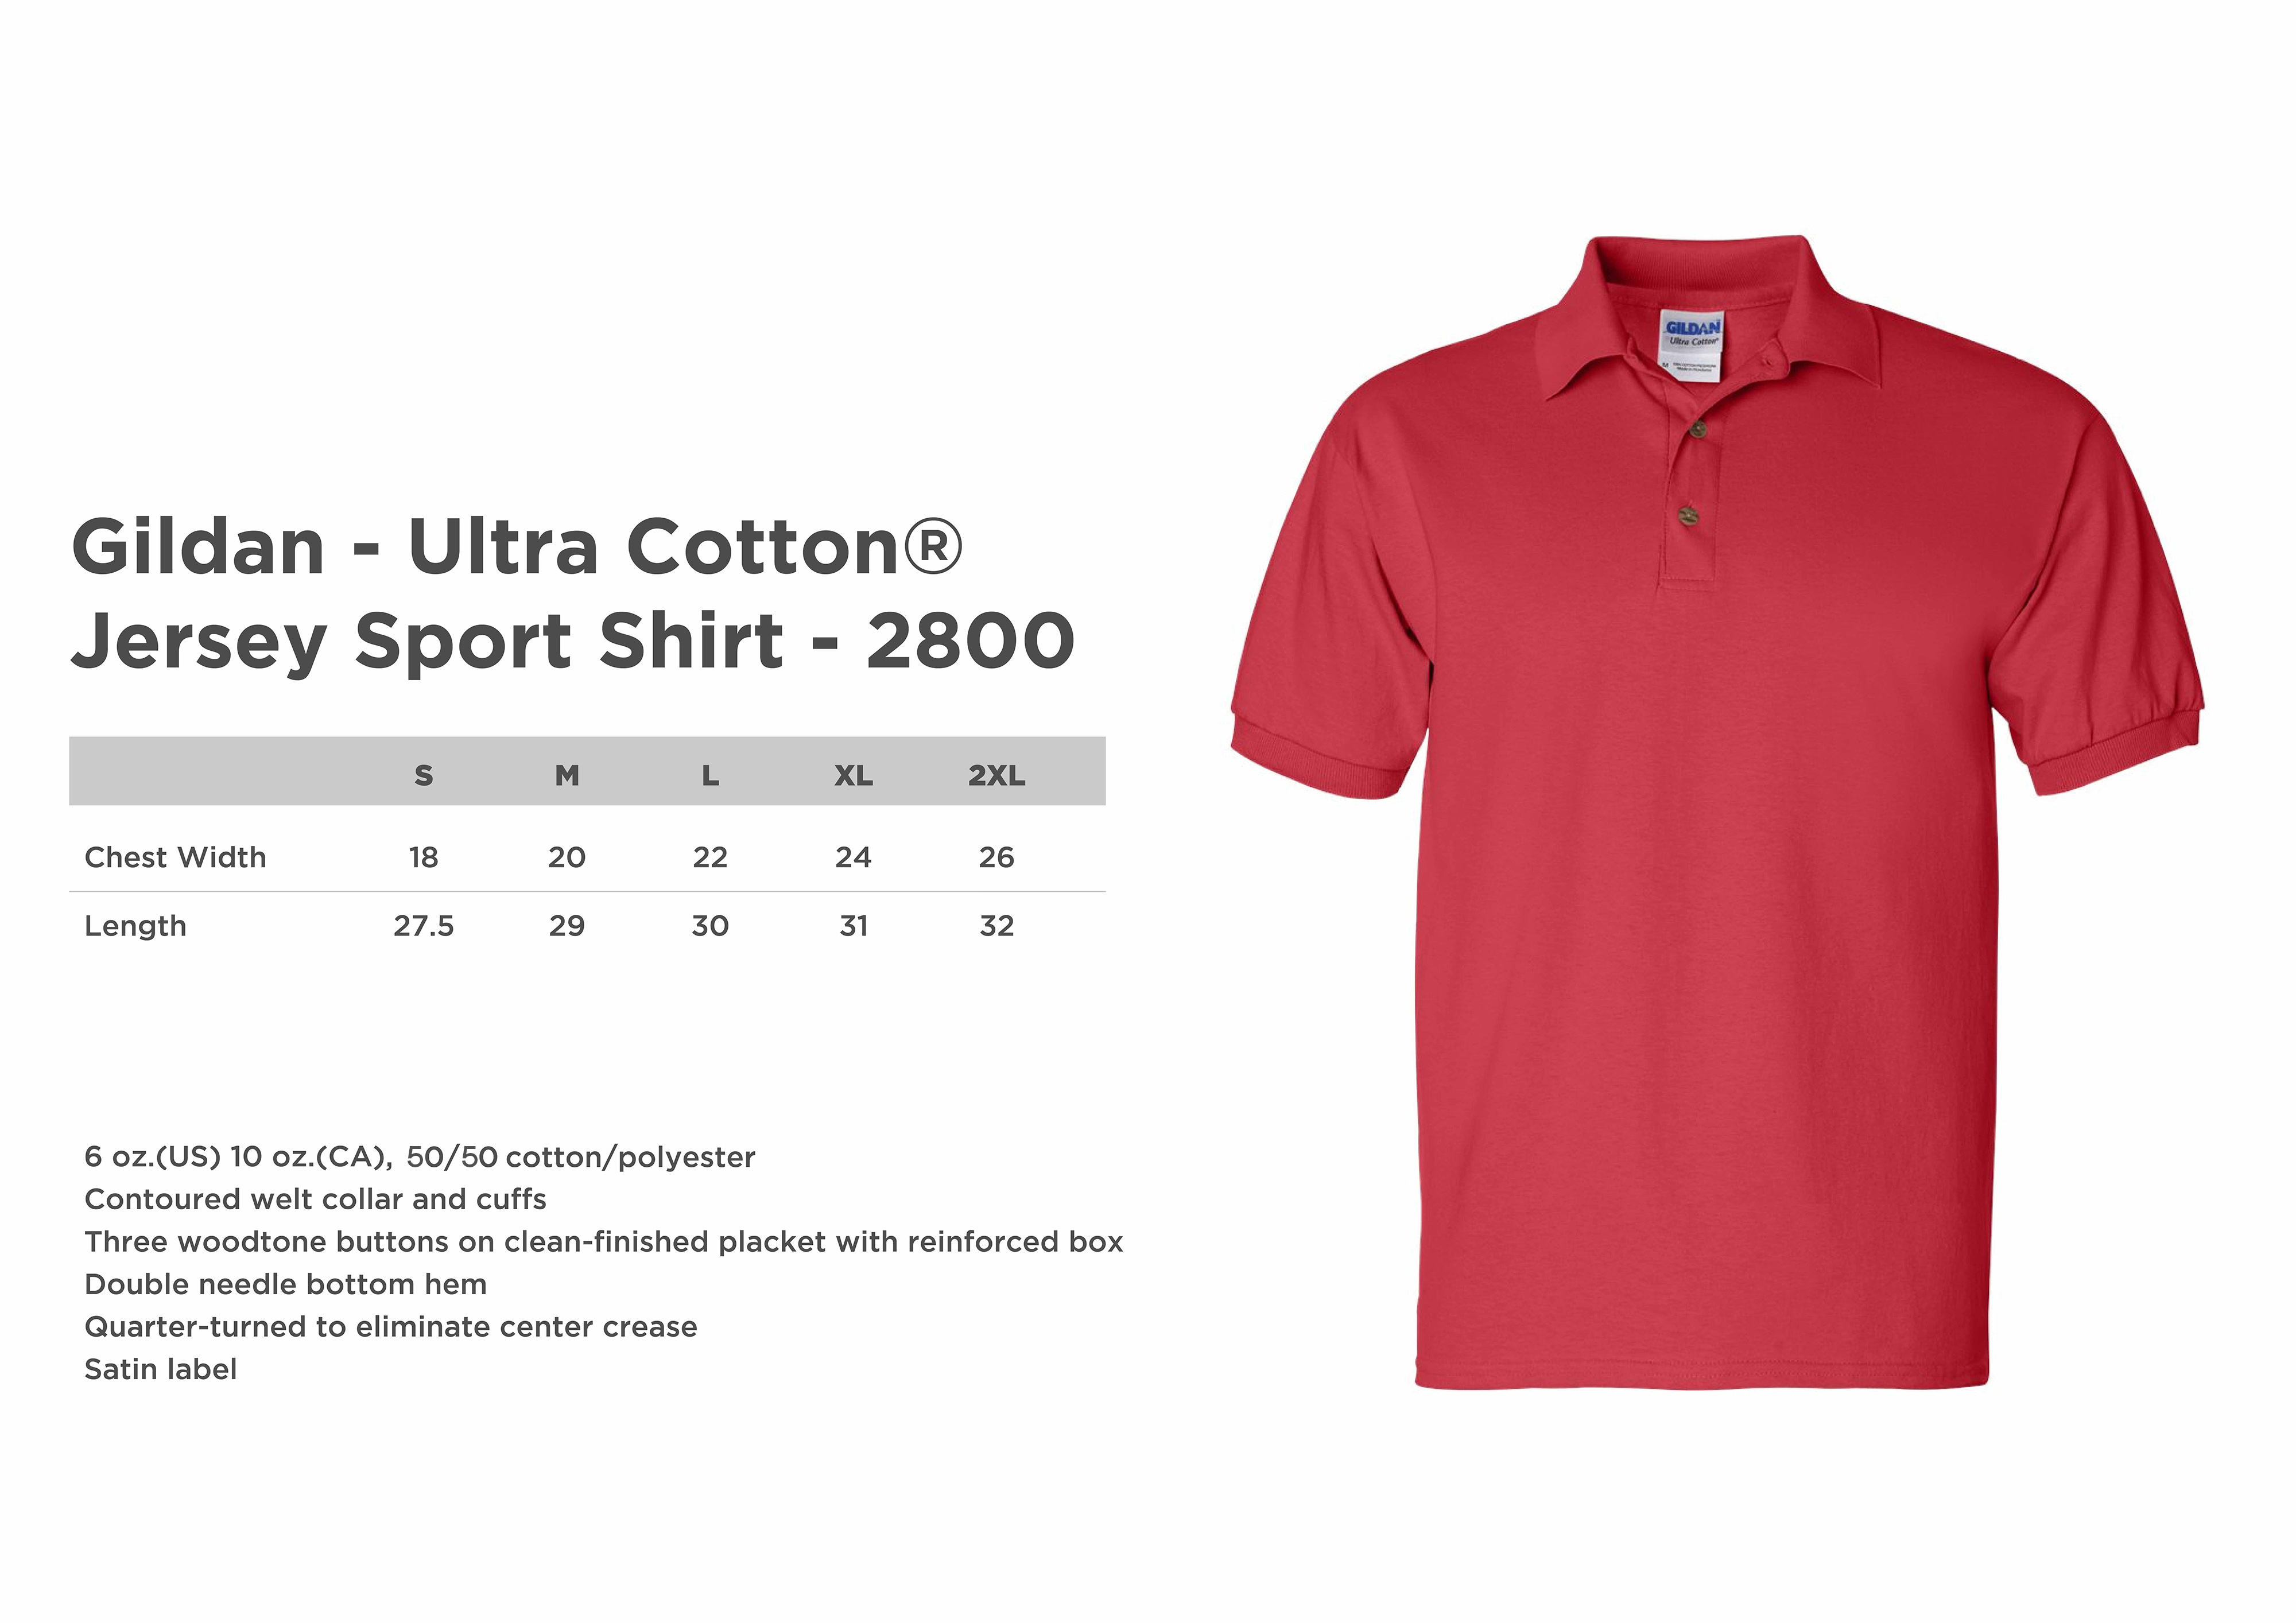 Button Down T Shirts for Mens Polo Shirts for Men Gildan Ultra Cotton Jersey Sport Shirt Polo Shirts with Colors Business Casual School White Shirts for Men 2800 S M L XL 2XL - image 2 of 2